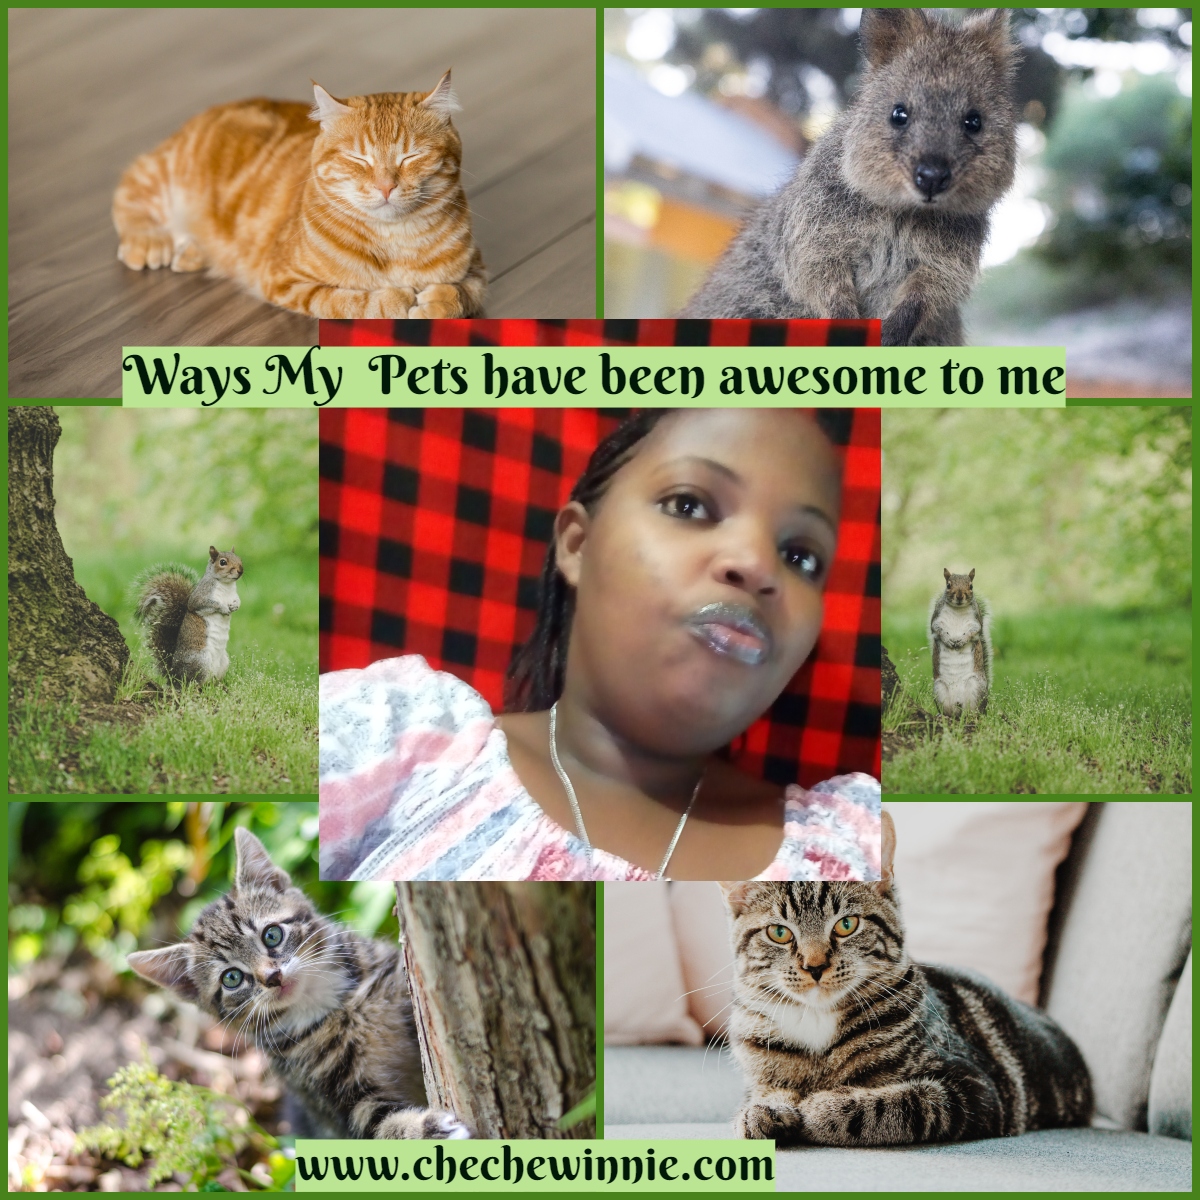 Ways My Pets have been awesome to me